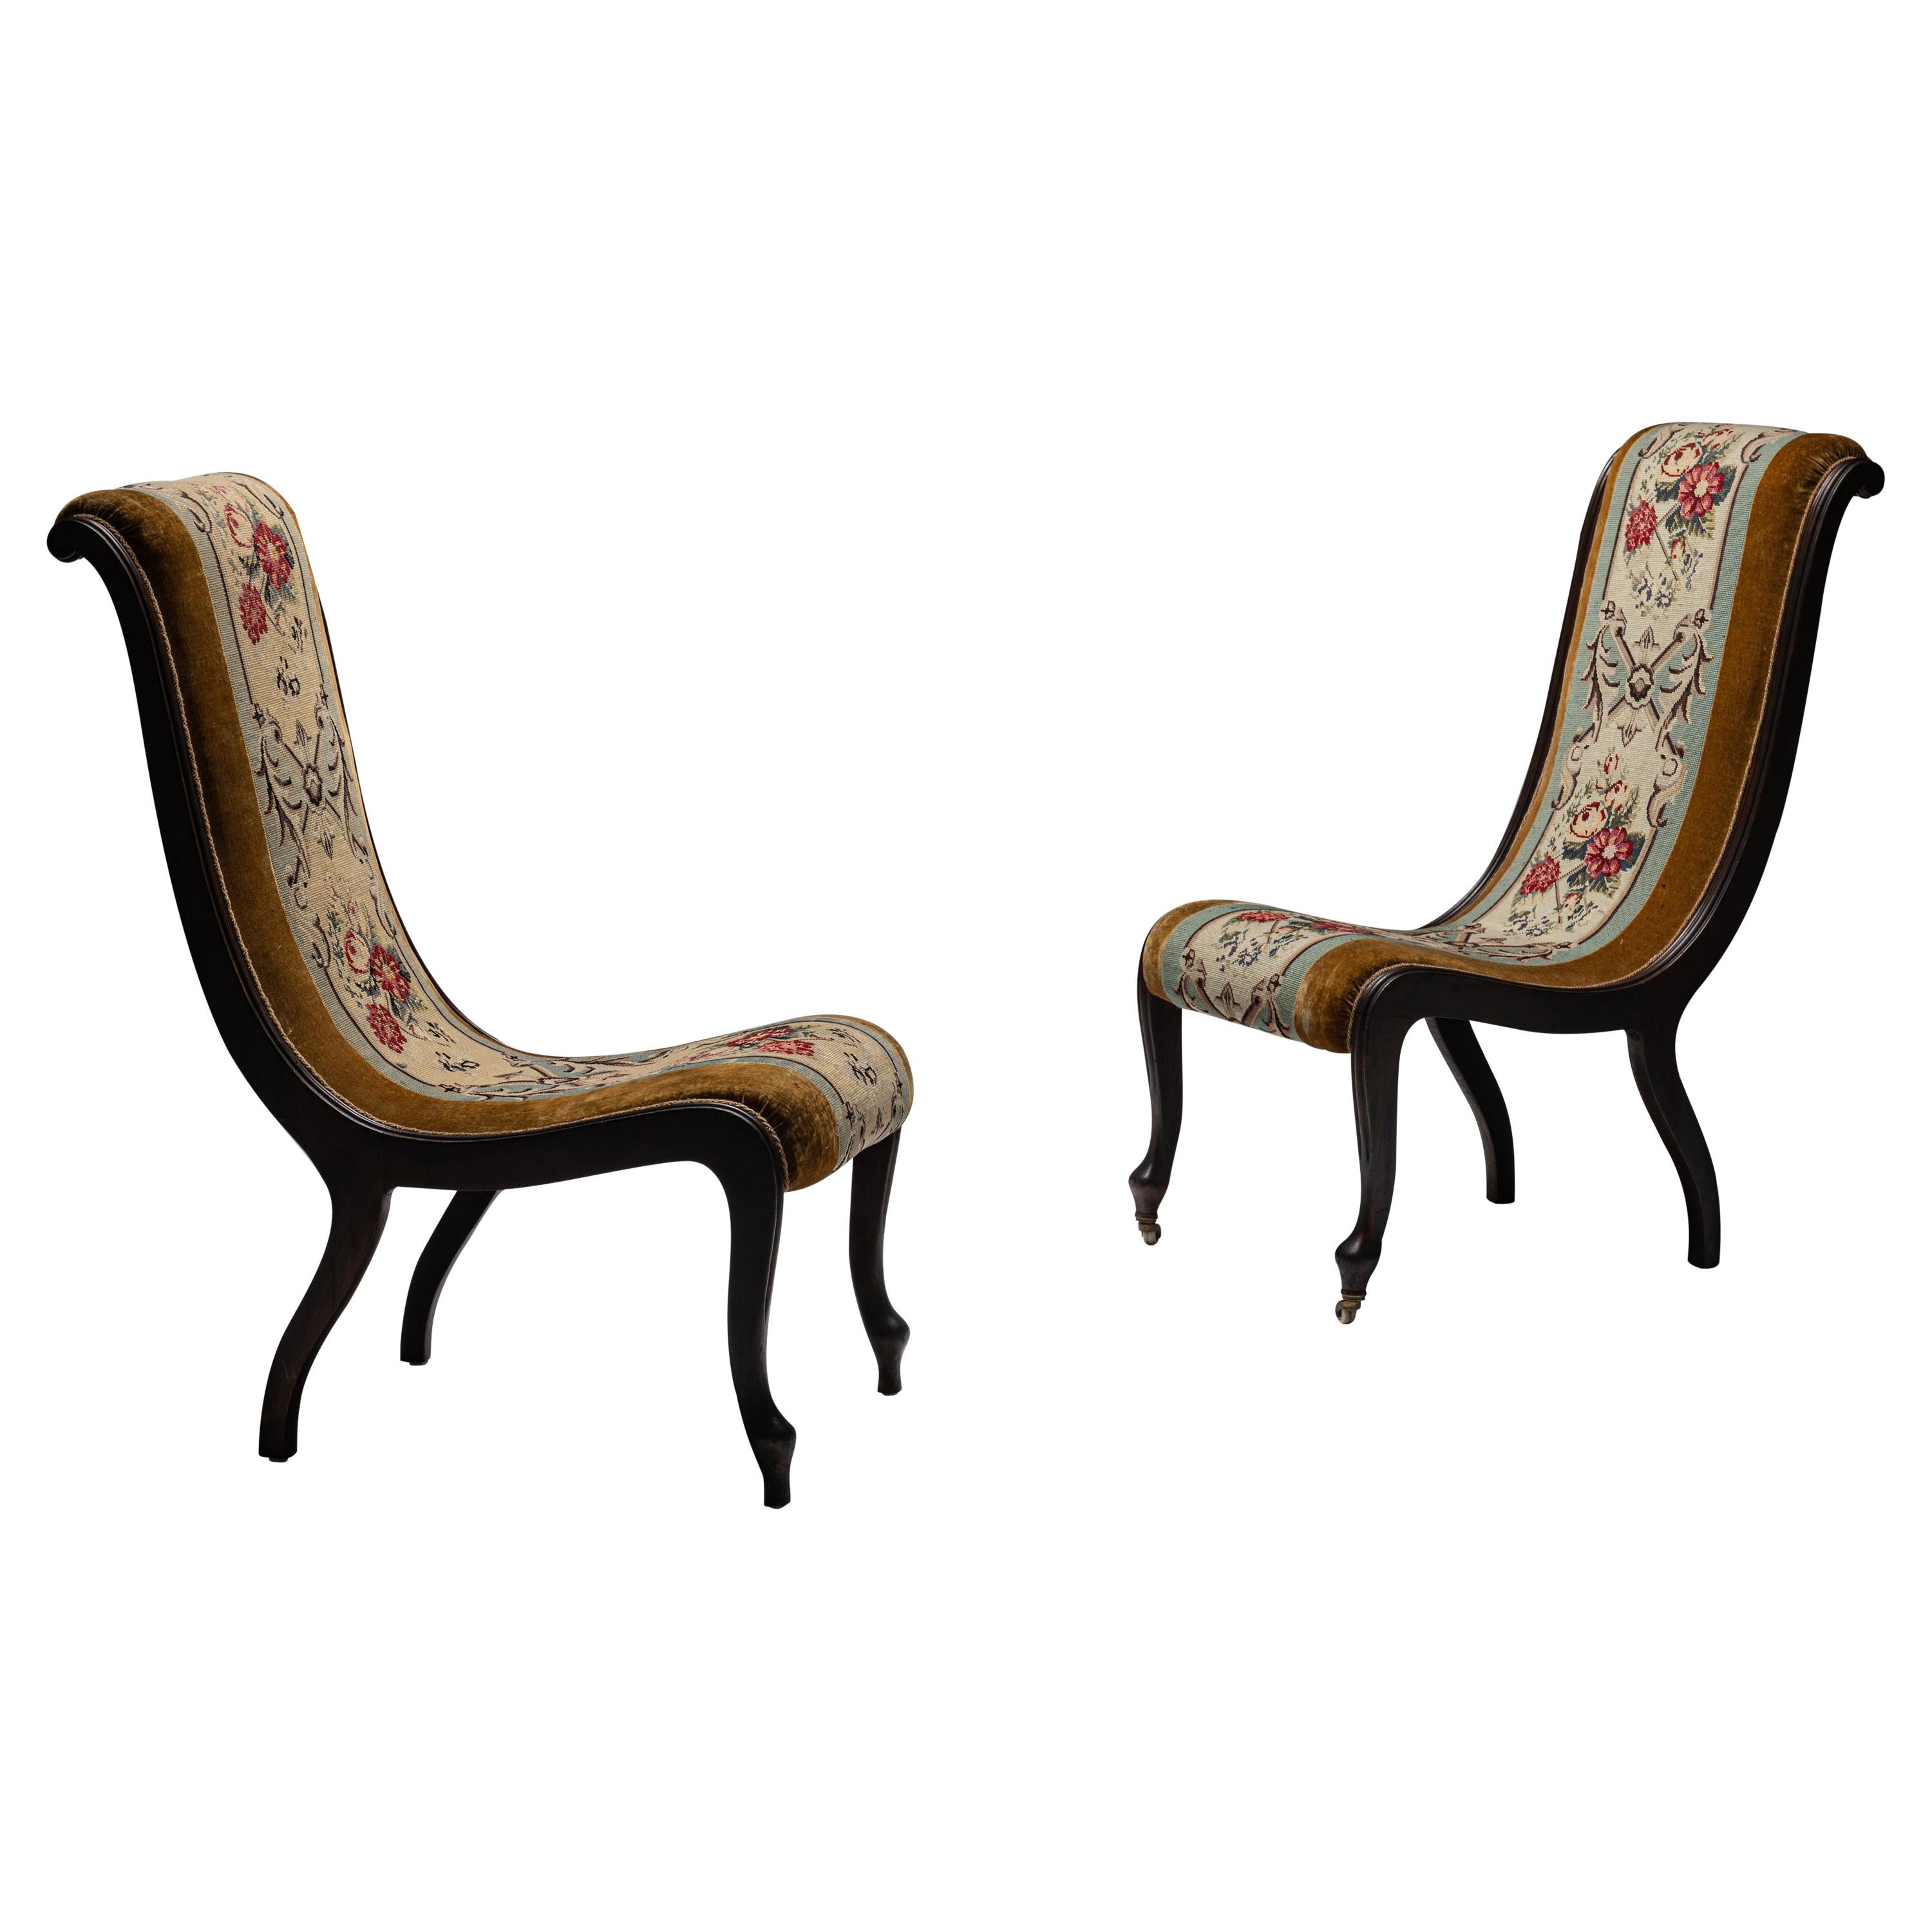 Pair of Elegant Tapestry Chairs, France circa 1880